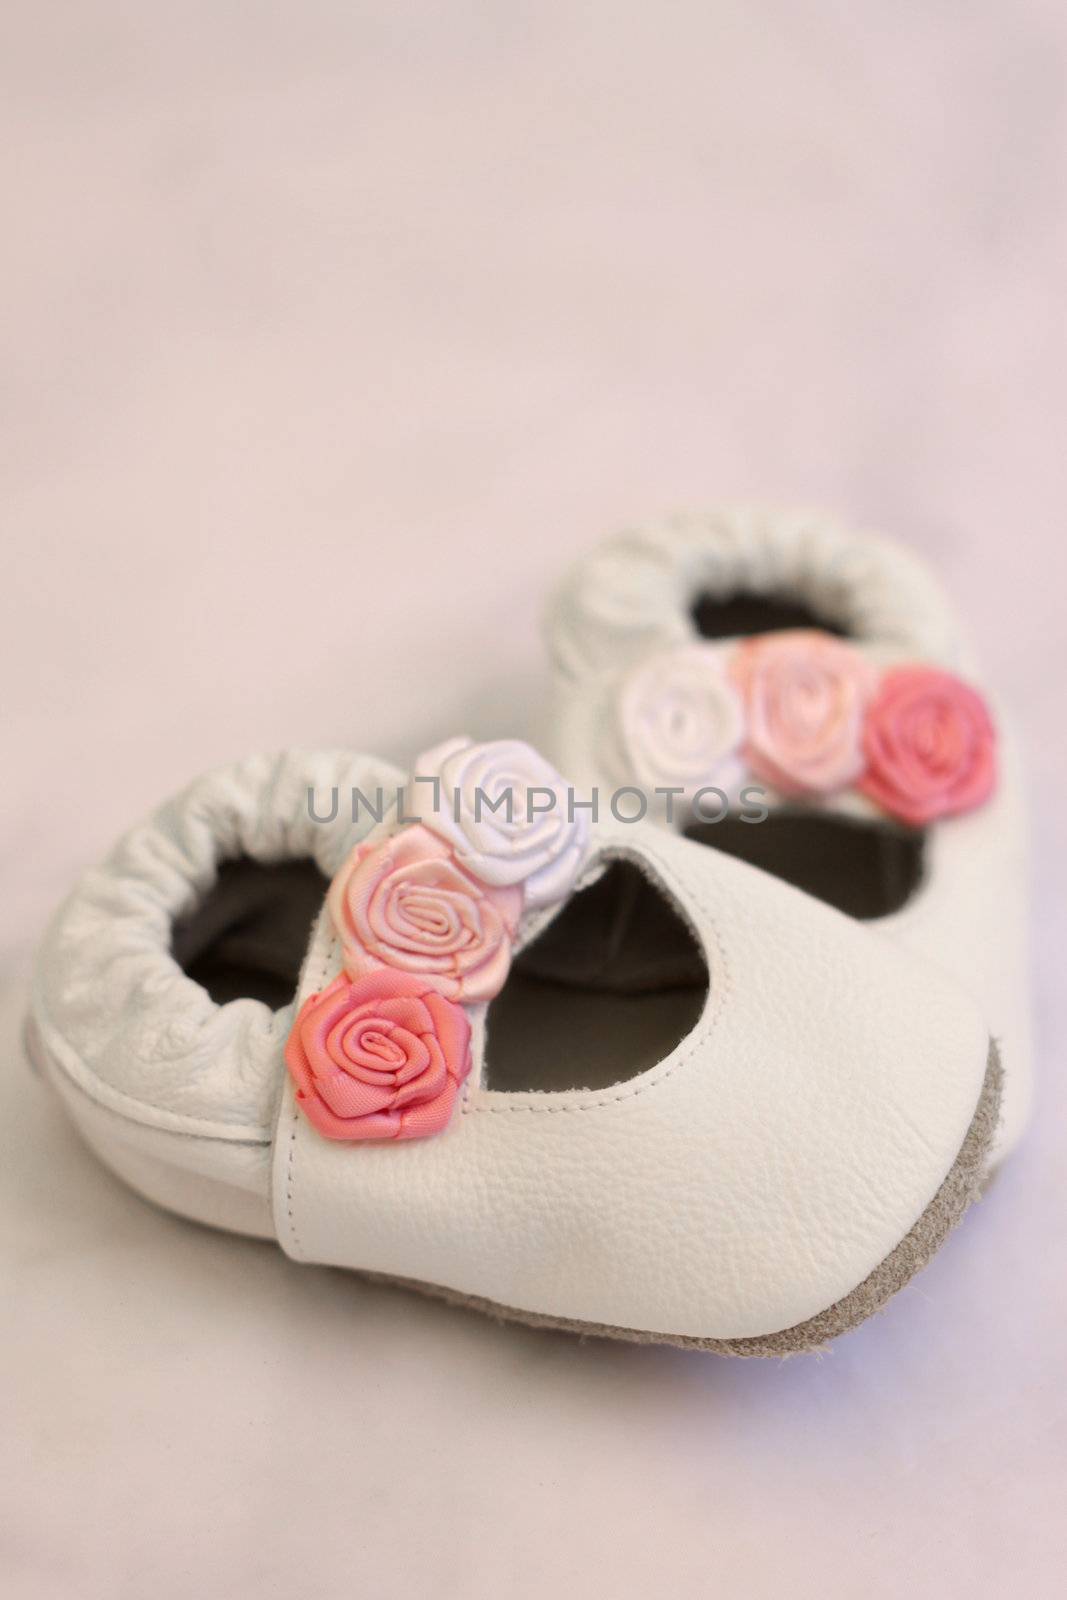 White leather shoes with roses for a small baby girl. Shot on grey background, soft focus